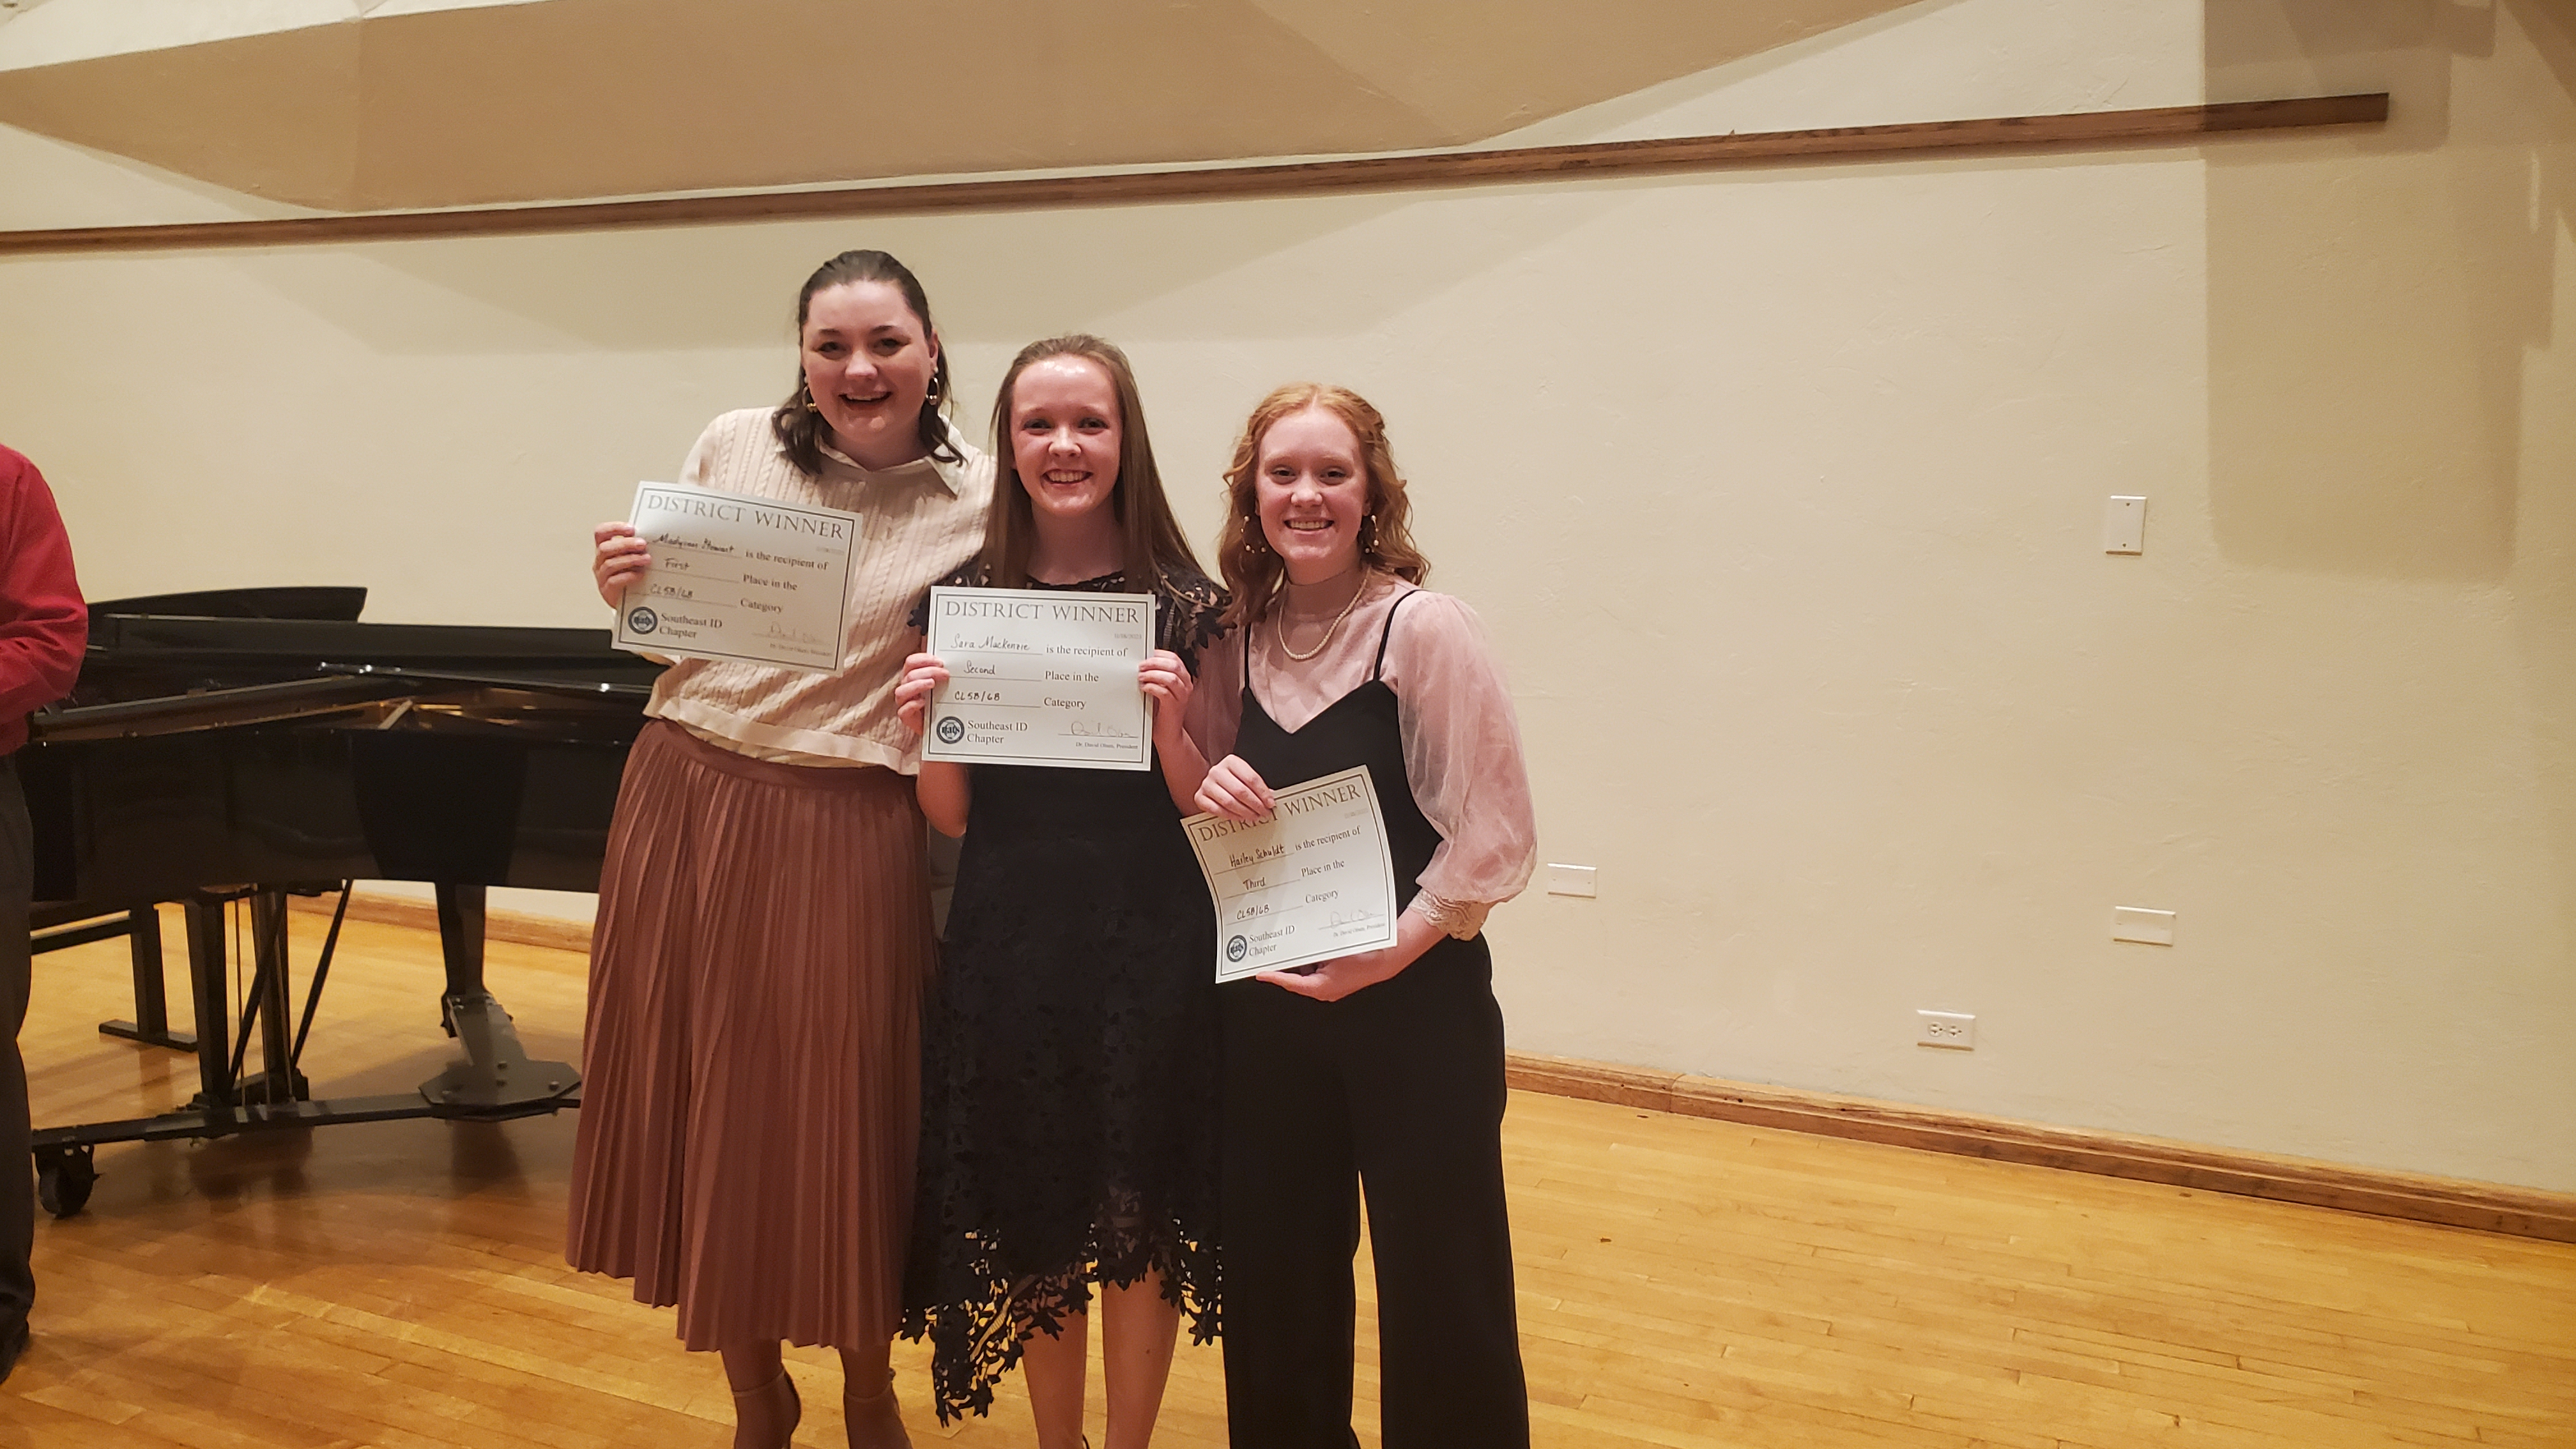 3 winning students pose with certificates in front of a grand piano